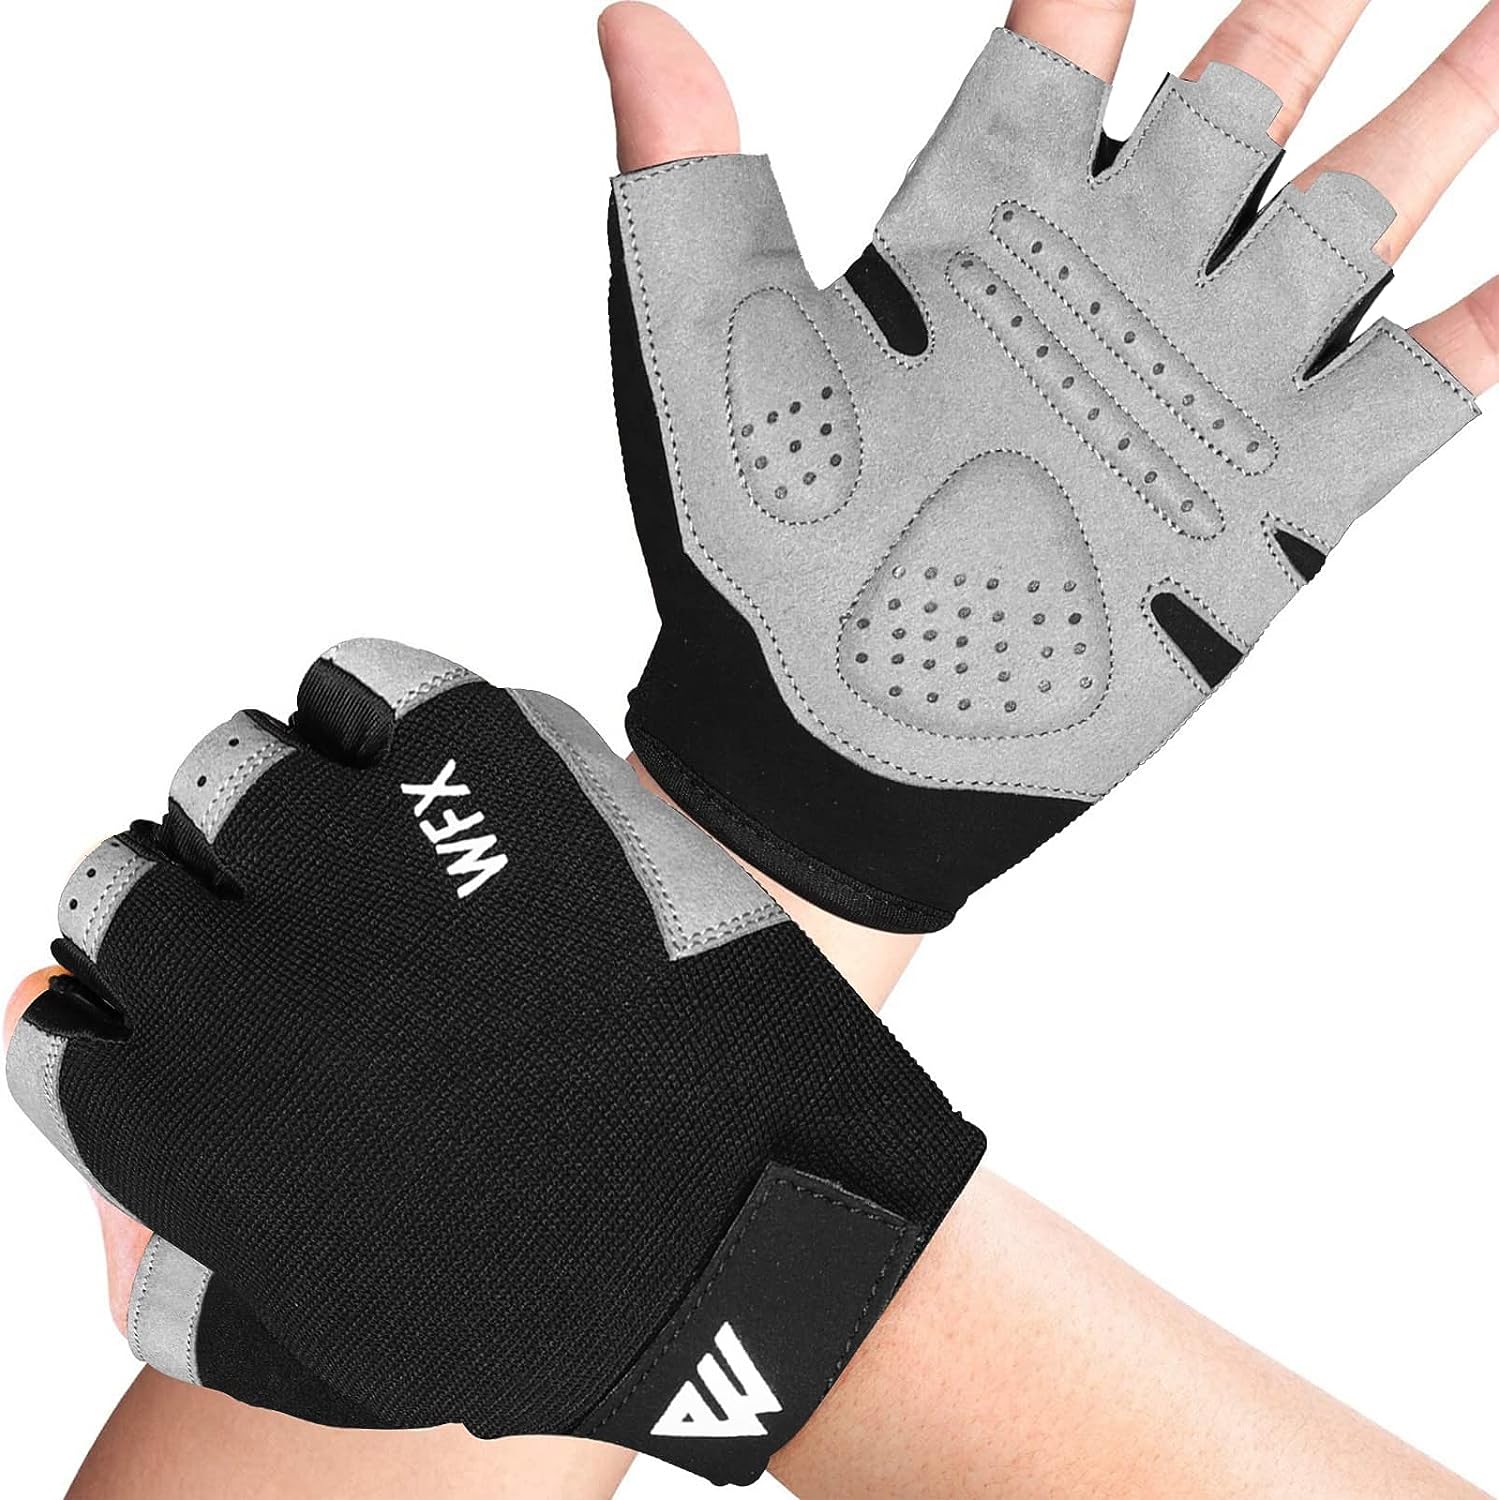 WESTWOOD FOX Gym Gloves Fitness Training Anti Slip Shock-Absorbing Weight Lifting Gloves Padded Grip Breathable Fingerless Workout Support for Men Women Cycling Exercise